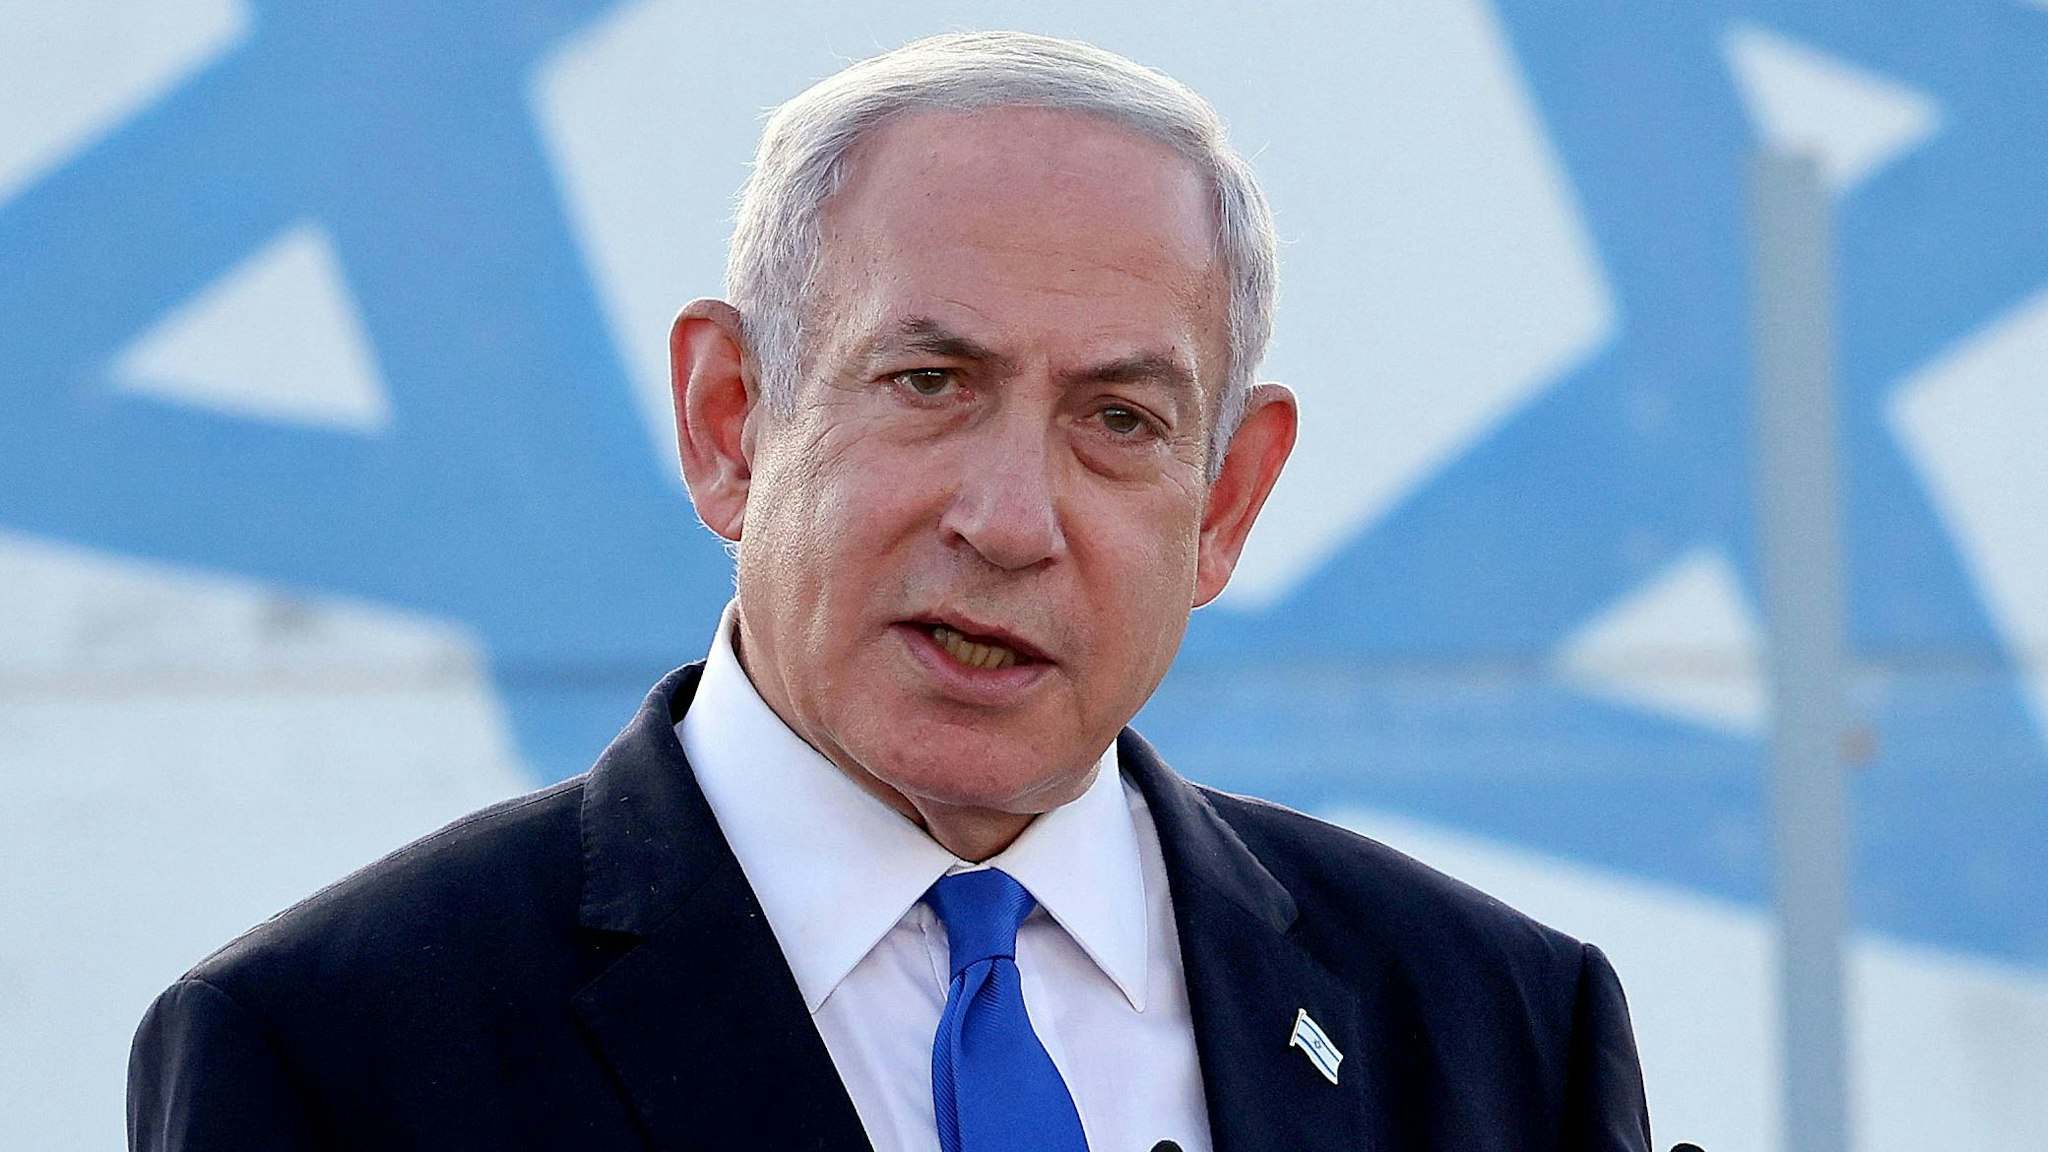 TOPSHOT - Israel's Prime Minister Benjamin Netanyahu delivers a speech during his visit to an Israeli unmanned aerial vehicle (UAV) centre, at the Palmachim Airbase near the city of Rishon LeZion on July 5, 2023.